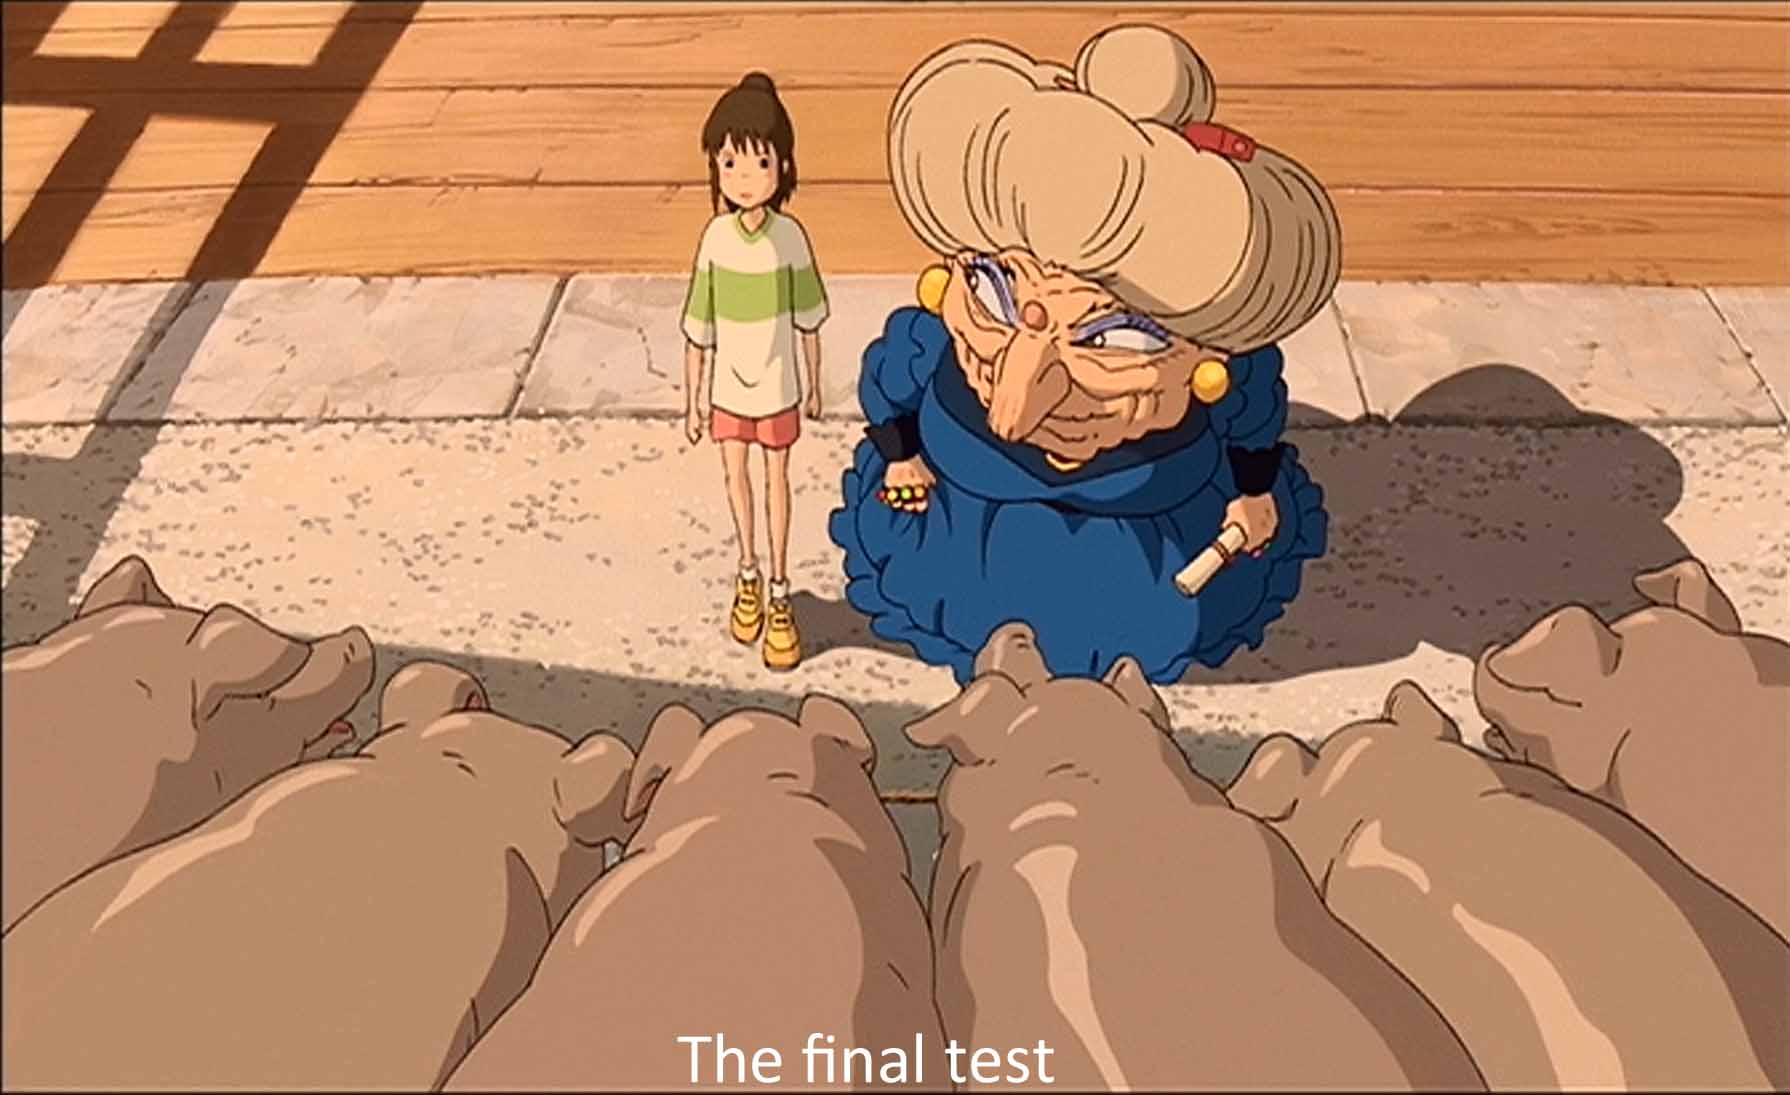 The final test